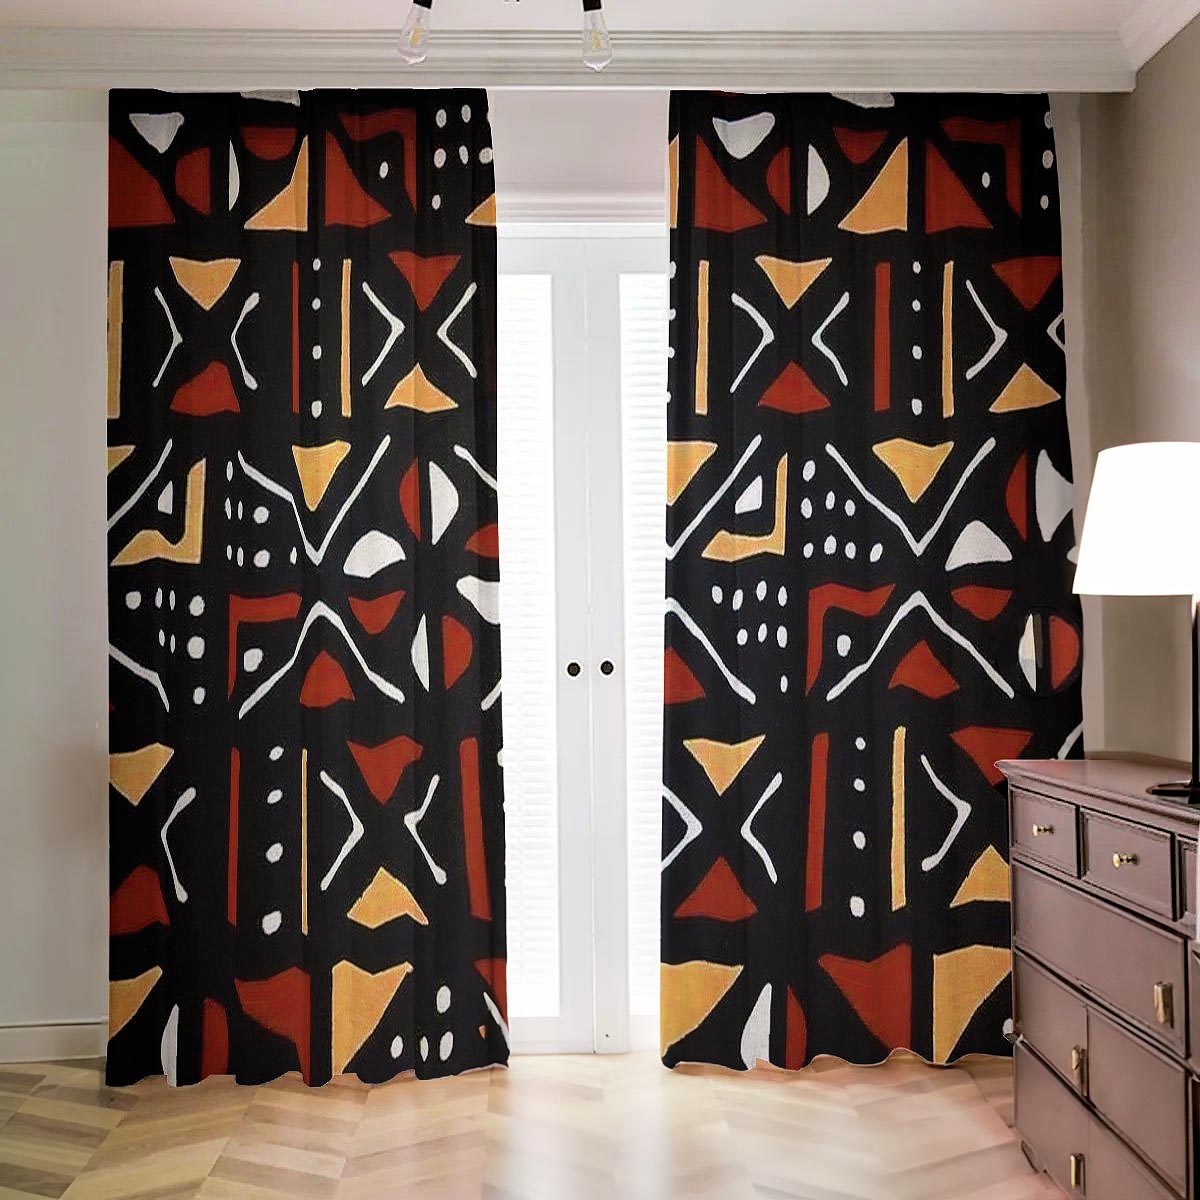 Latest Blackout Curtain in African Mudcloth Print - Bynelo